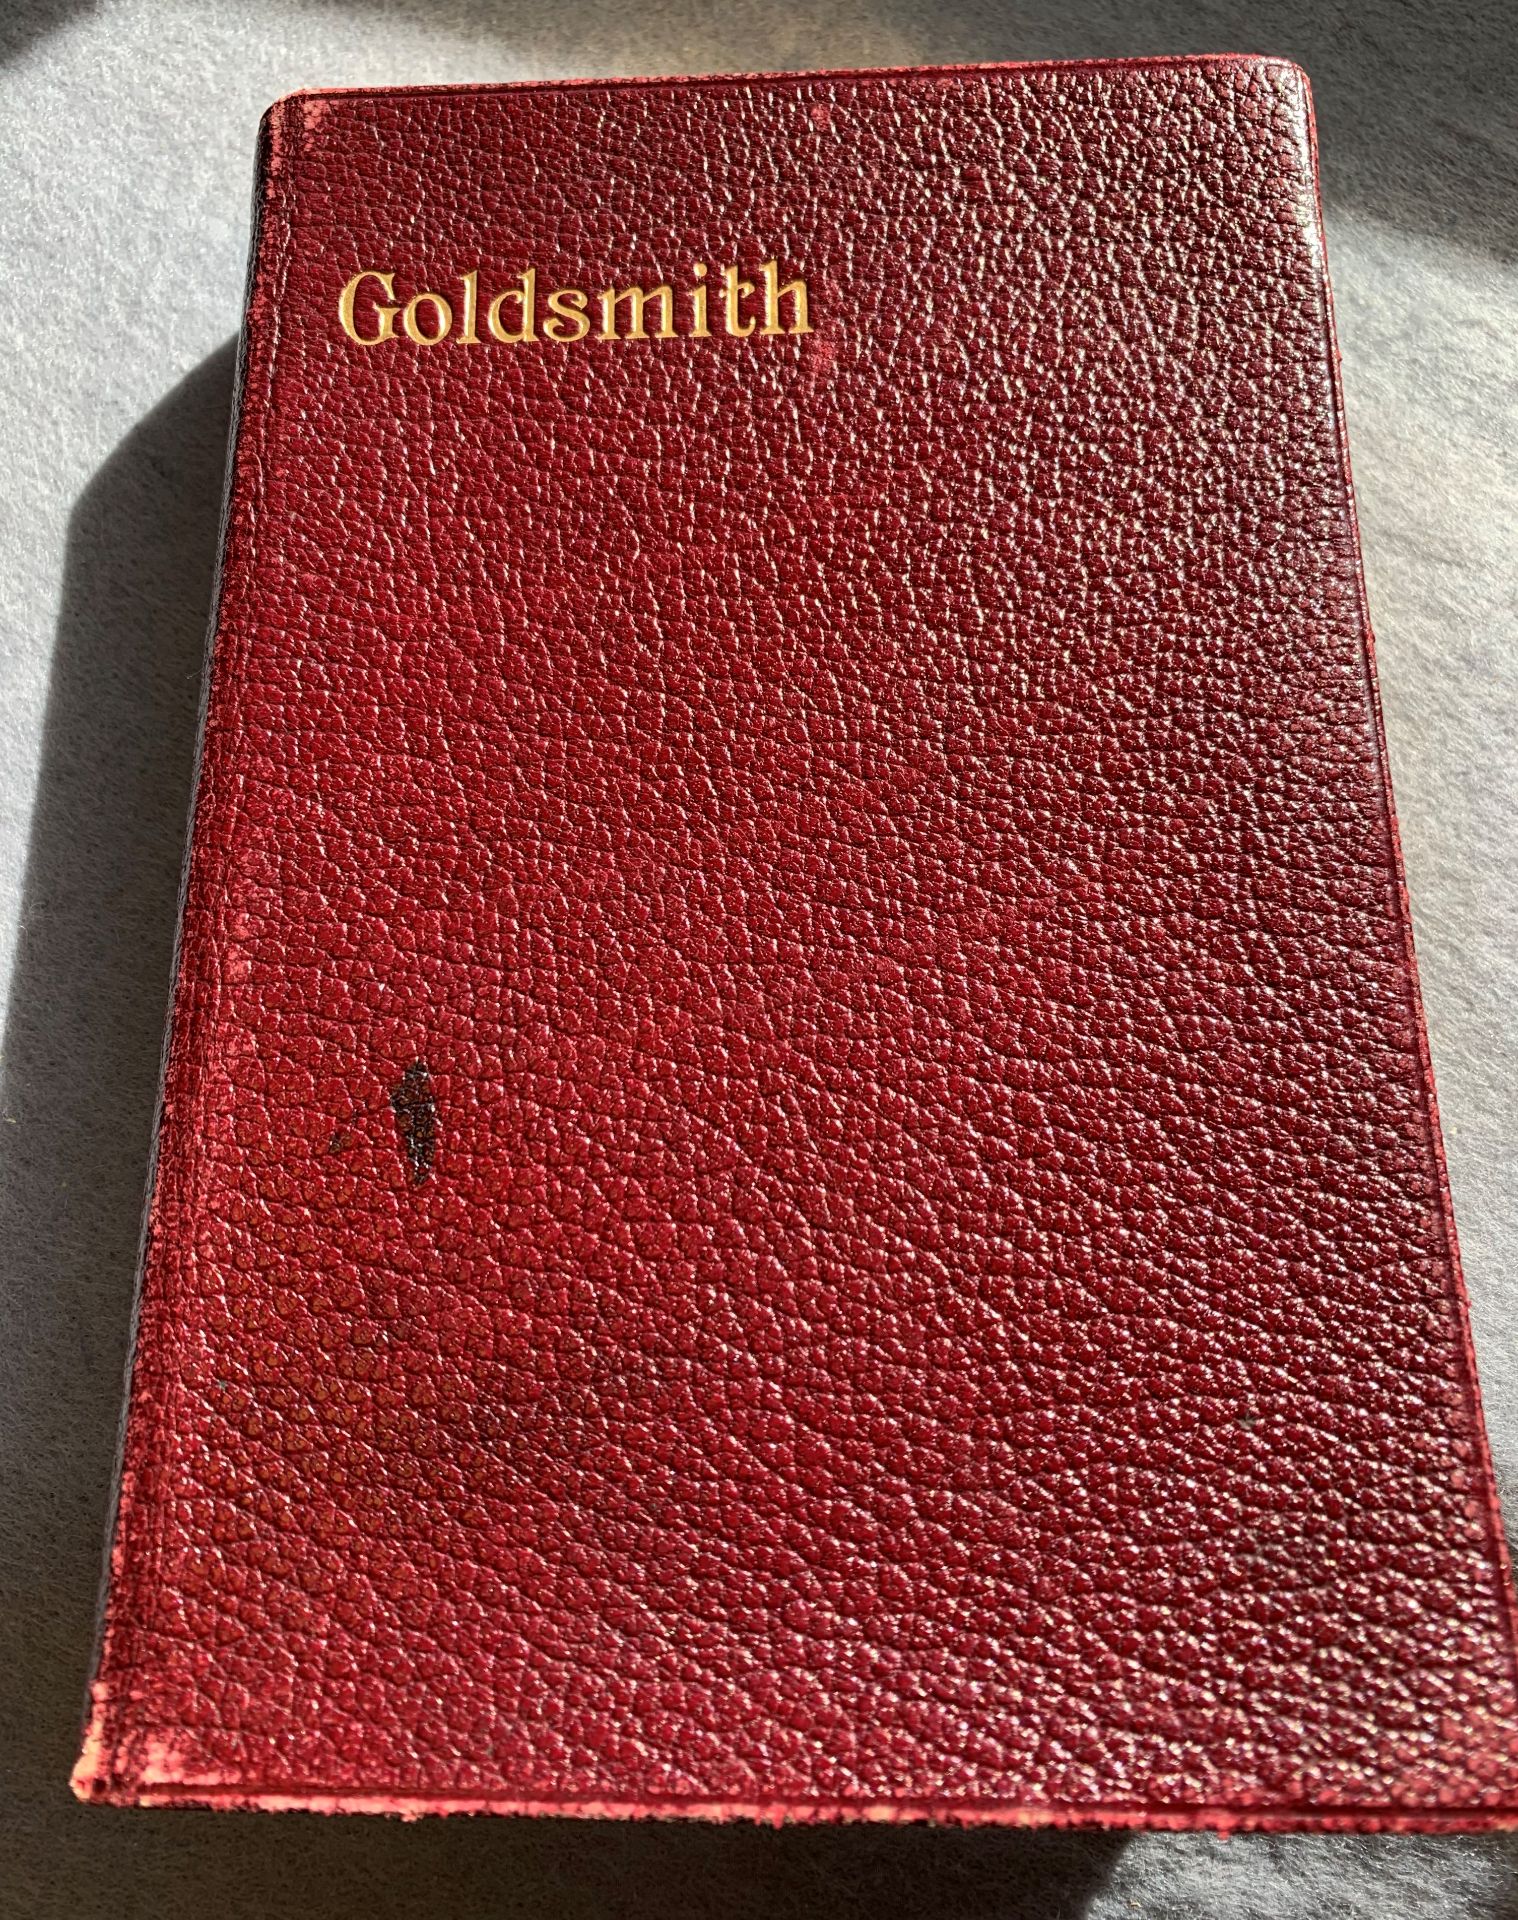 Goldsmith (Oliver) - Goldsmith's Choice Works comprising his Vicar of Wakefield, Poems and Plays,